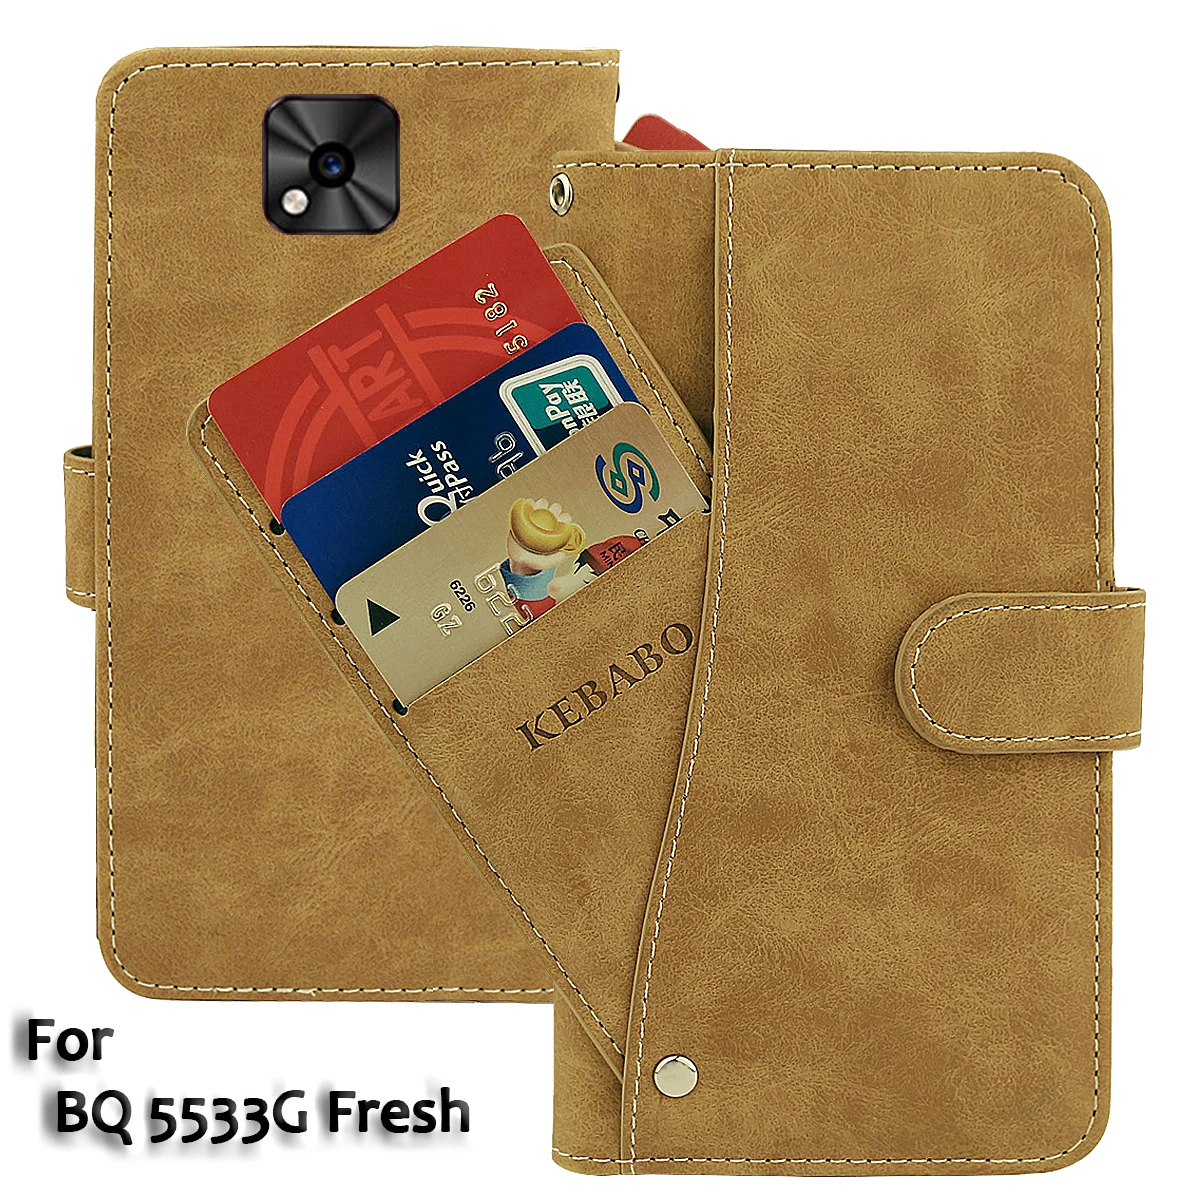 

Vintage Leather Wallet BQ 5533G Fresh Case 5.45" Flip Luxury Card Slots Cover Magnet Phone Protective Cases Bags